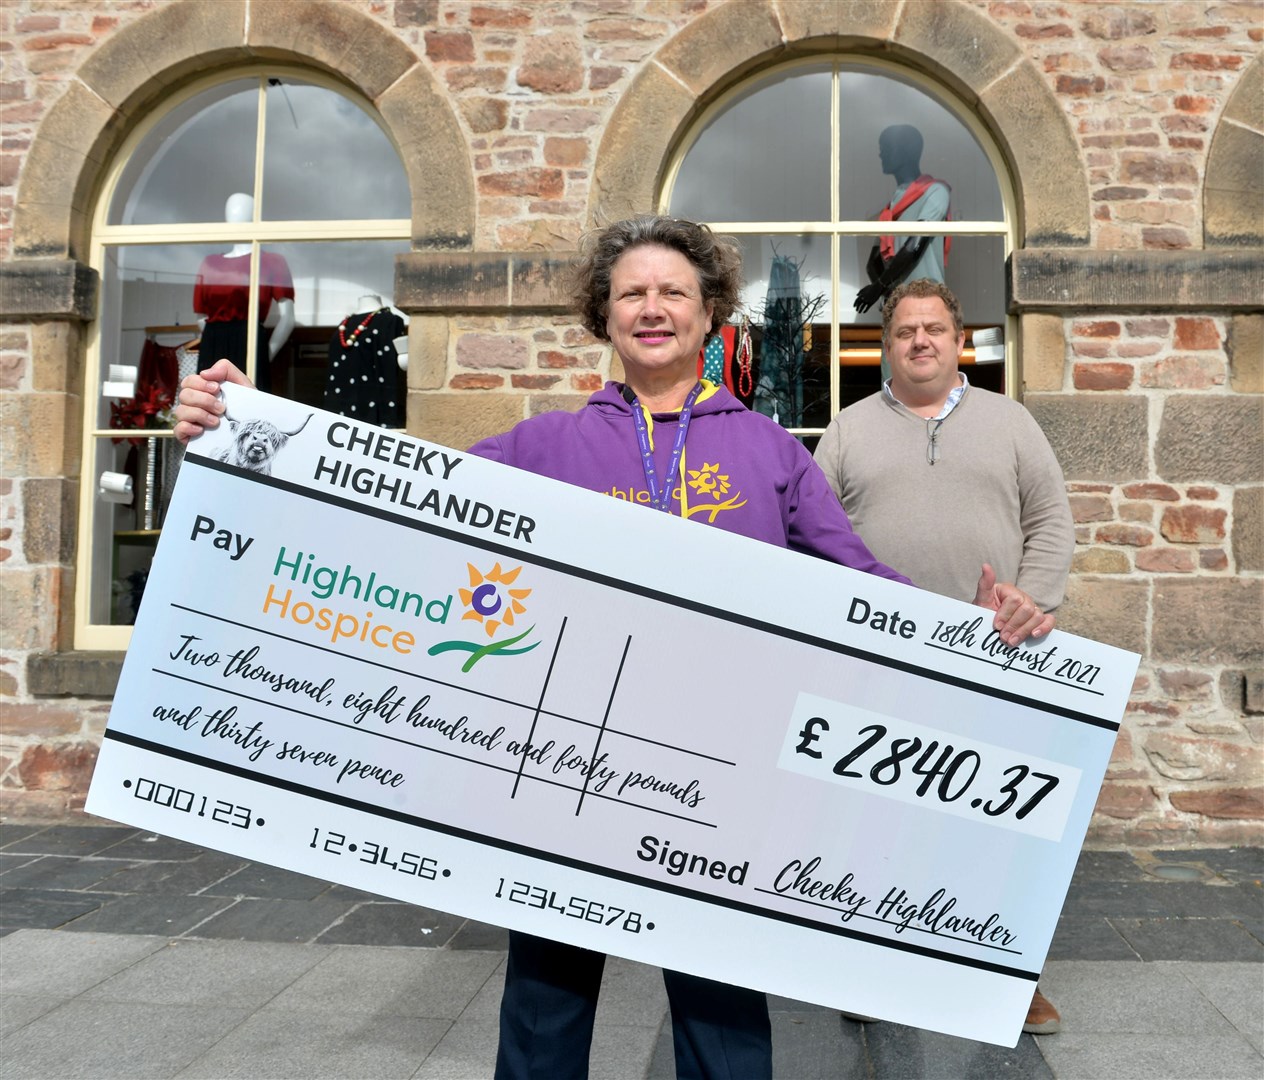 Marcus Salter of Cheeky Highlander antiques raised over £2800 for Highland Hospice with the help of a chainsaw artist.Katie Gibb accepted the cheque at the Highland Hospice shop in Falcon Square. Picture: Callum Mackay